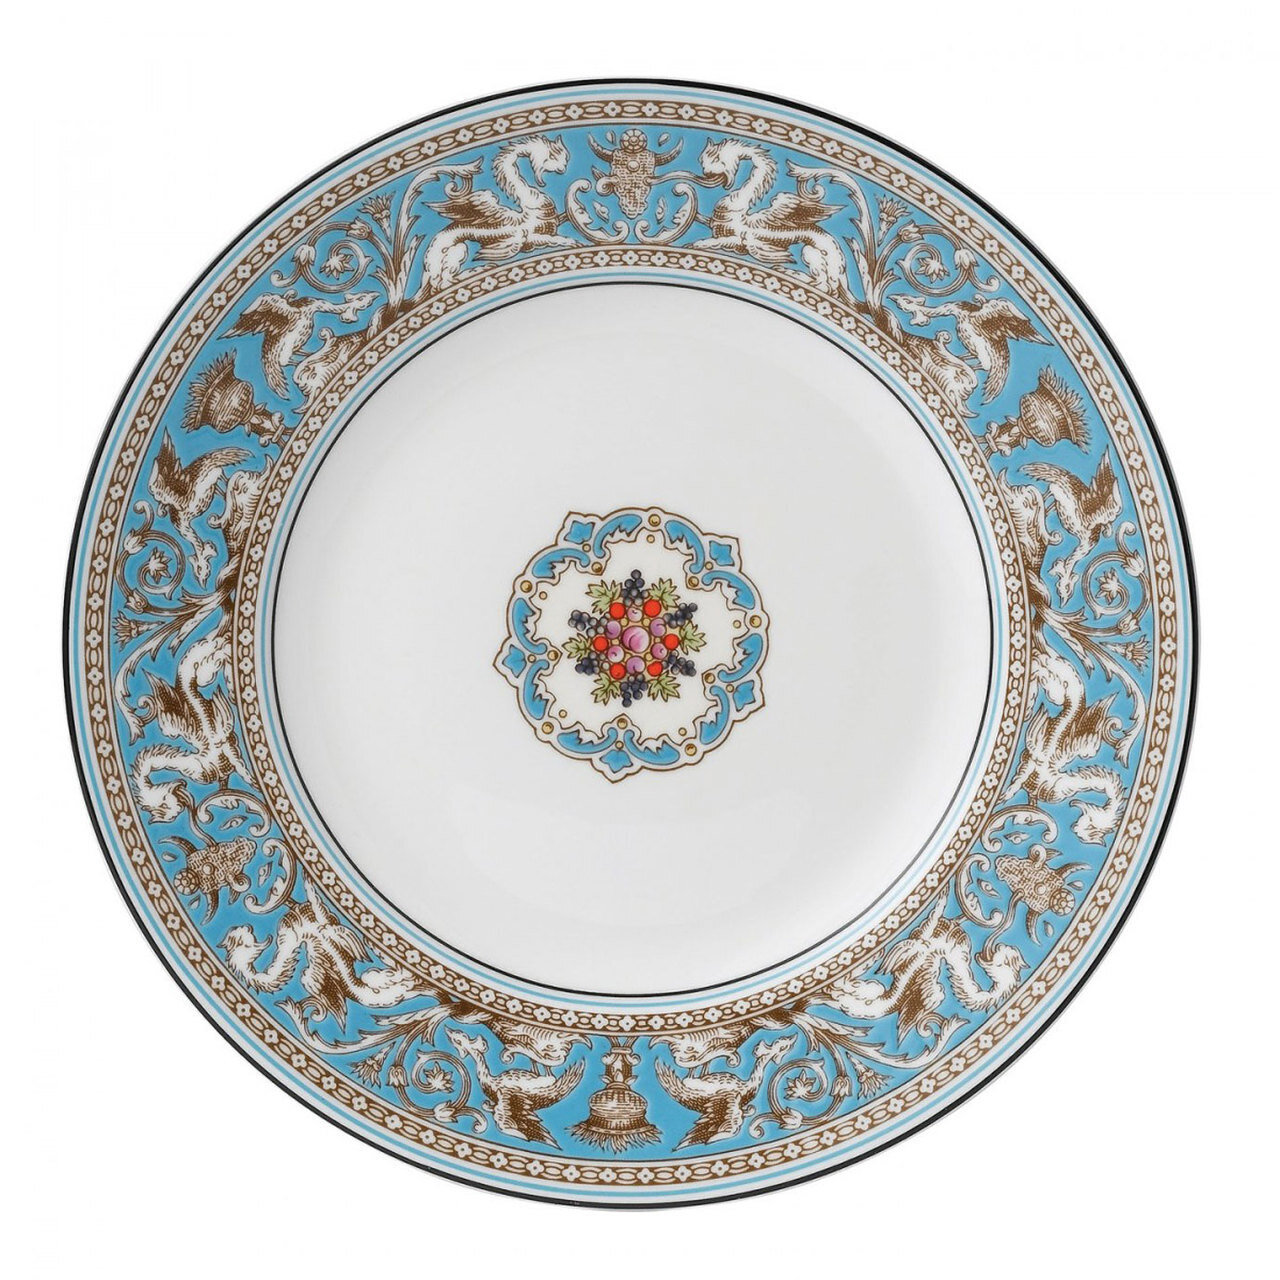 Wedgwood Florentine Turquoise Accent Salad Plate 9 Inch